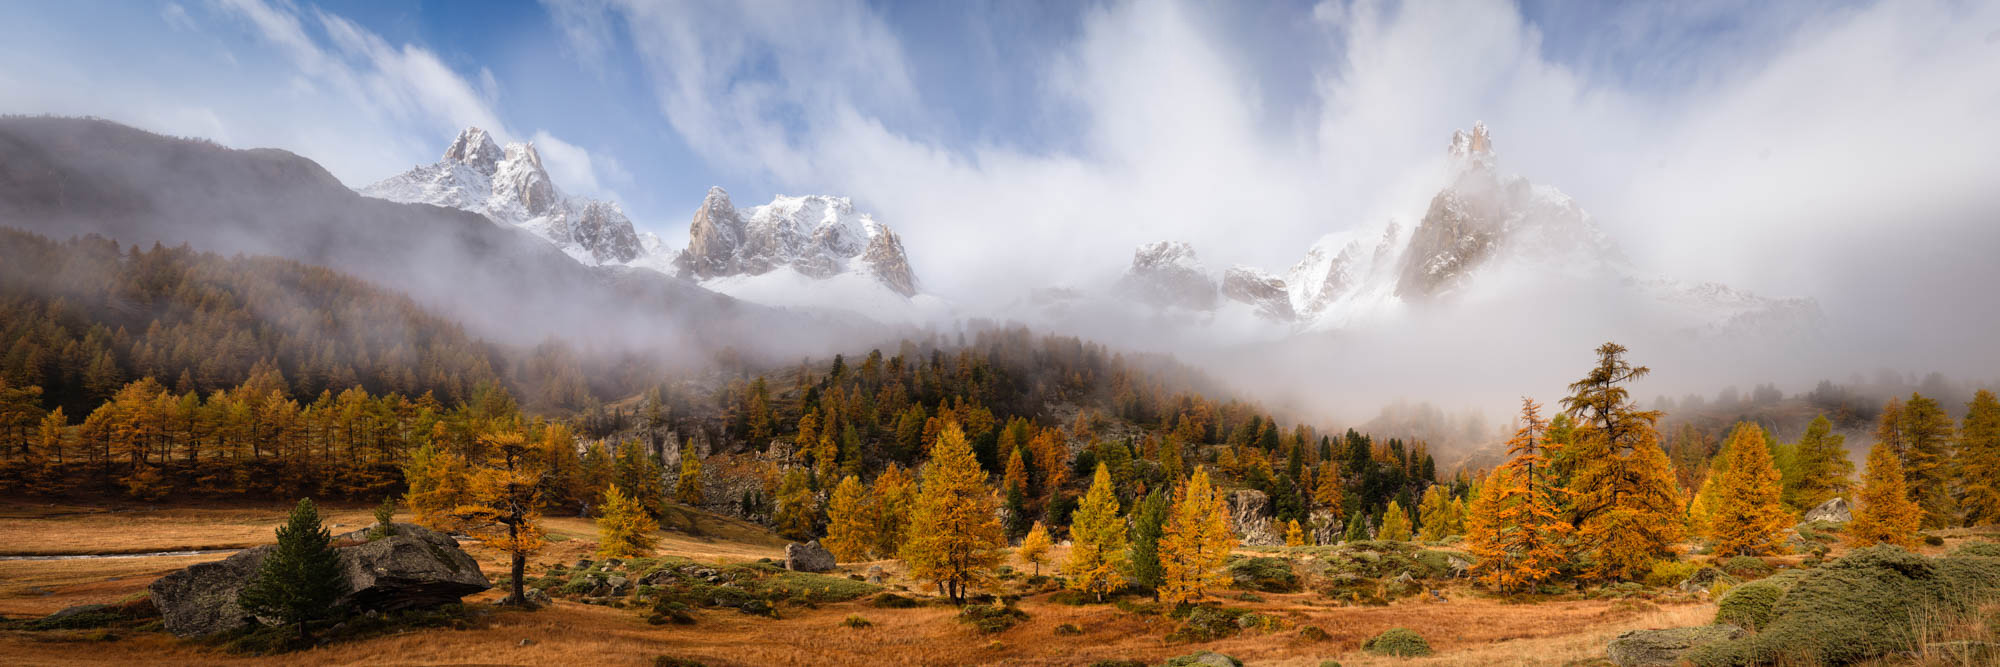 Panorama of Vallée de la Clarée in the French Alps in Autumn